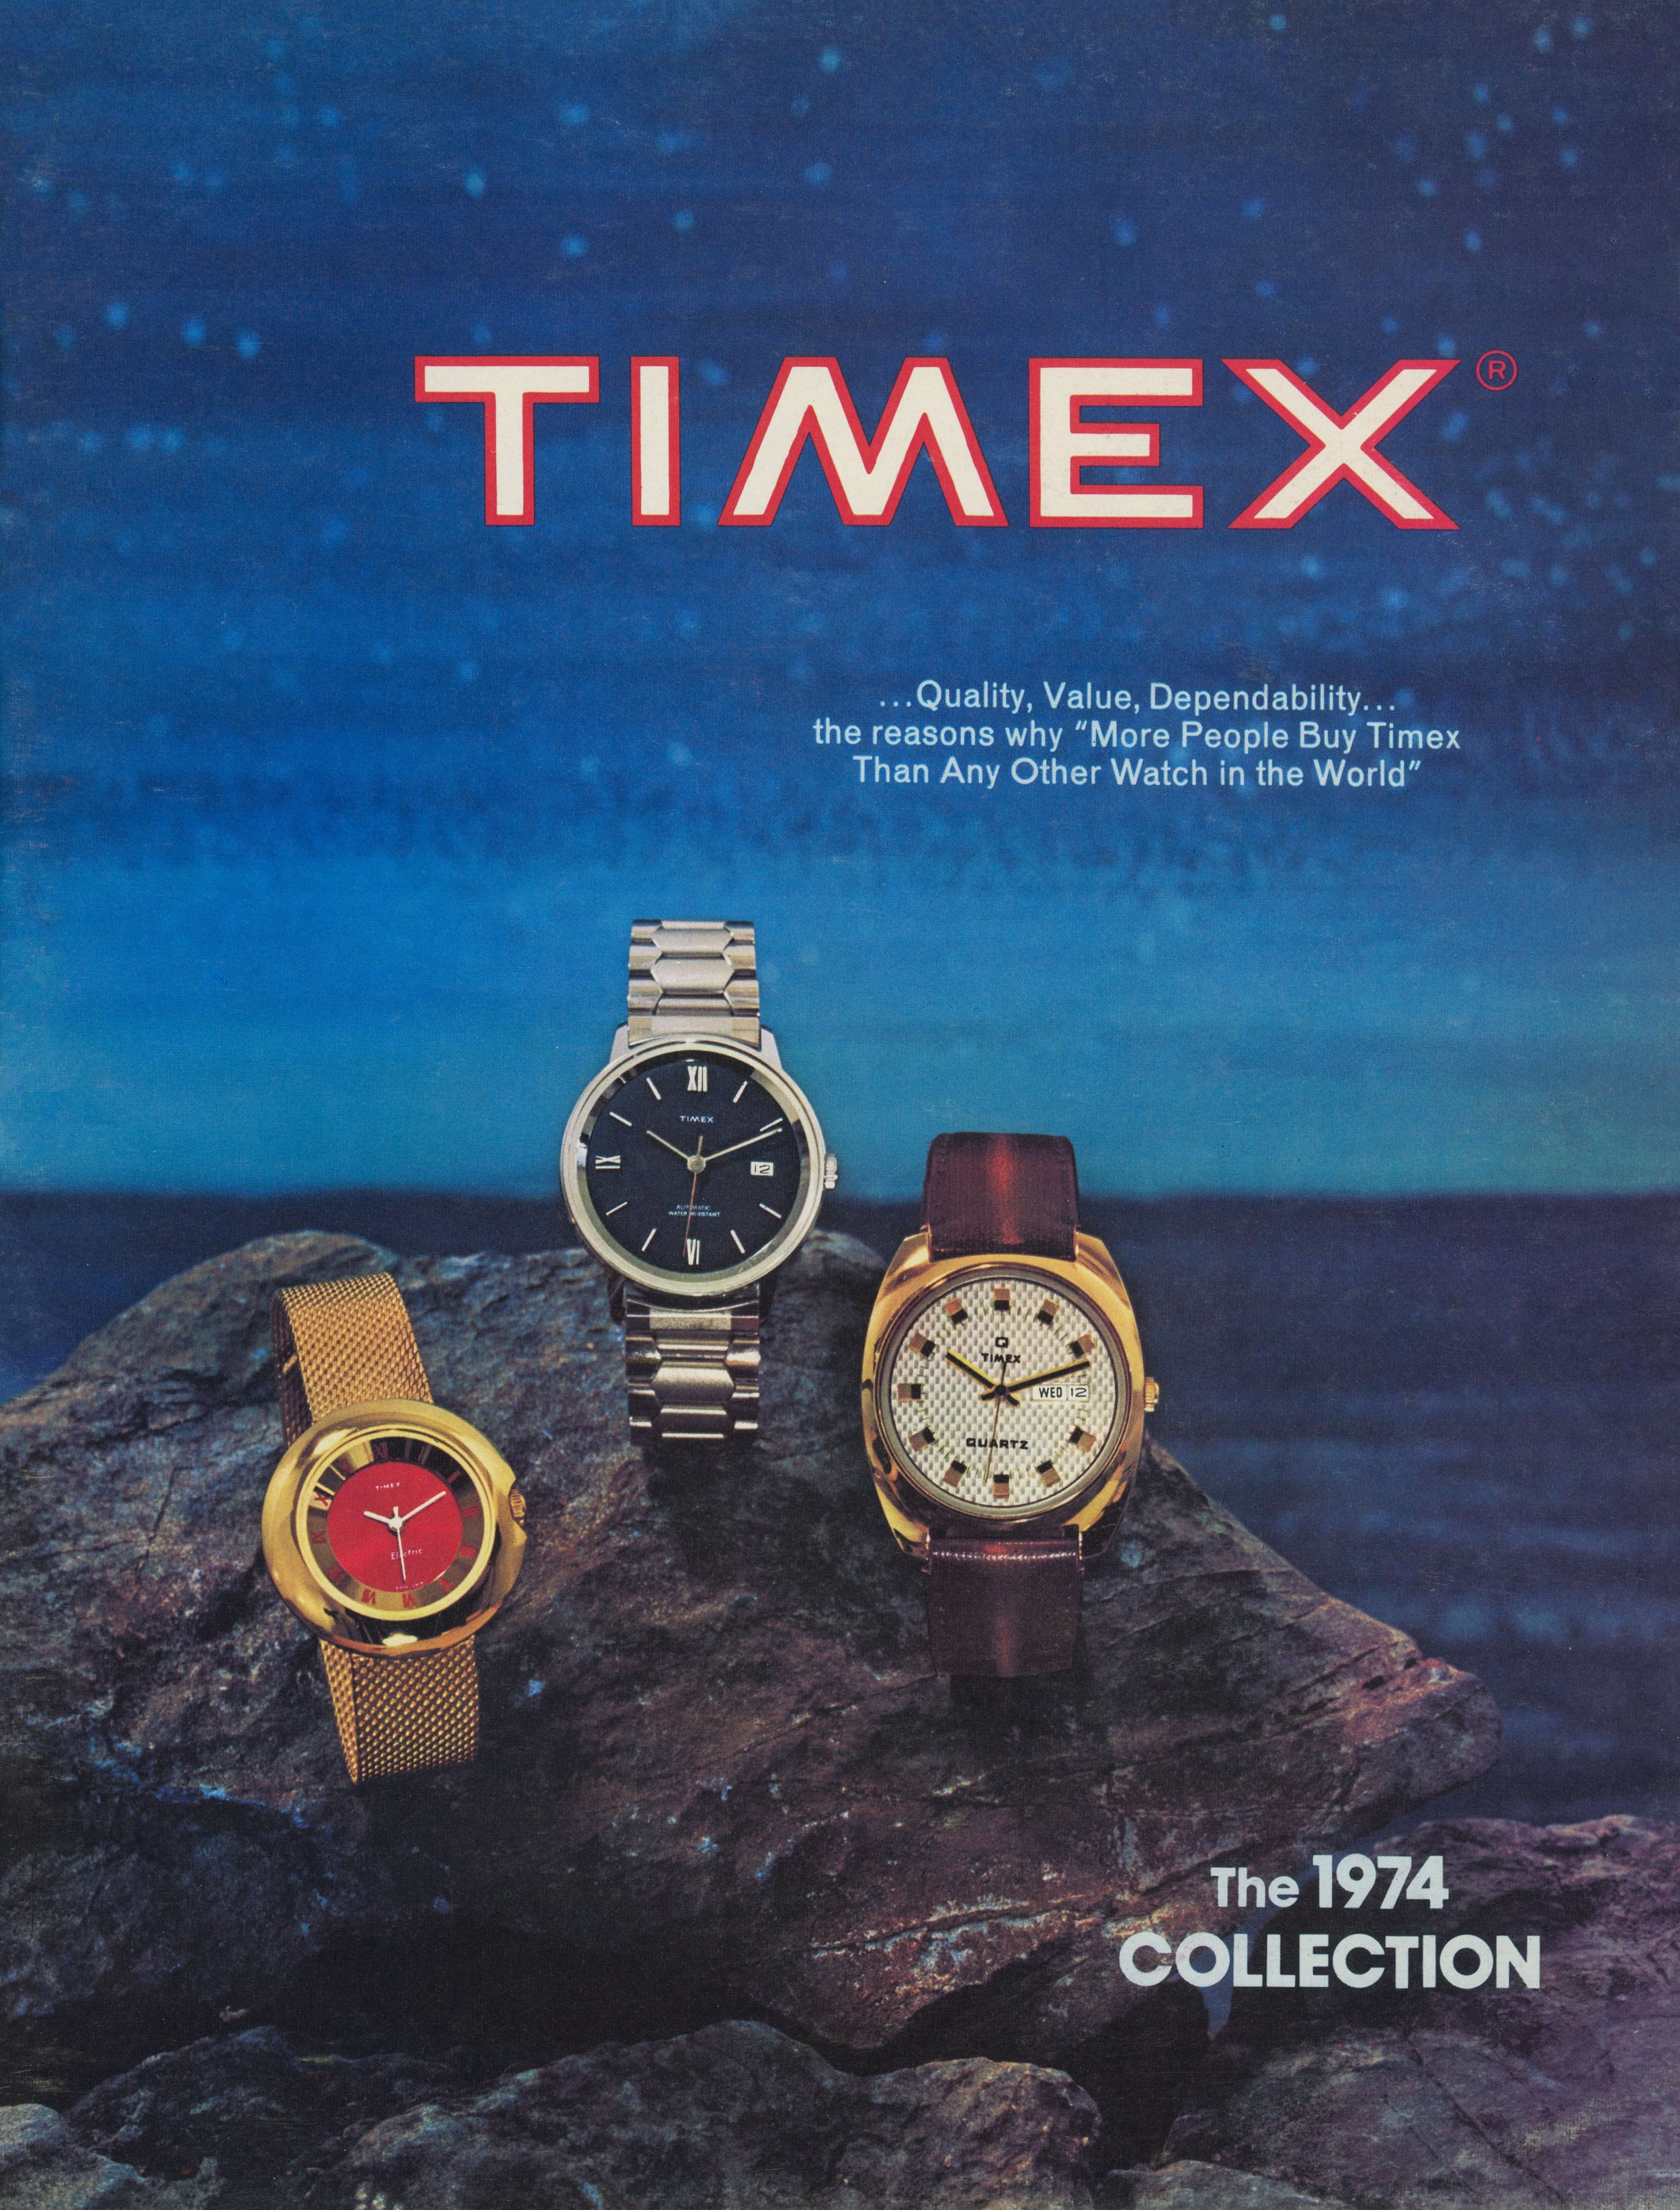 Timex 1974 Catalog and Ad Reference — Heritage 1854